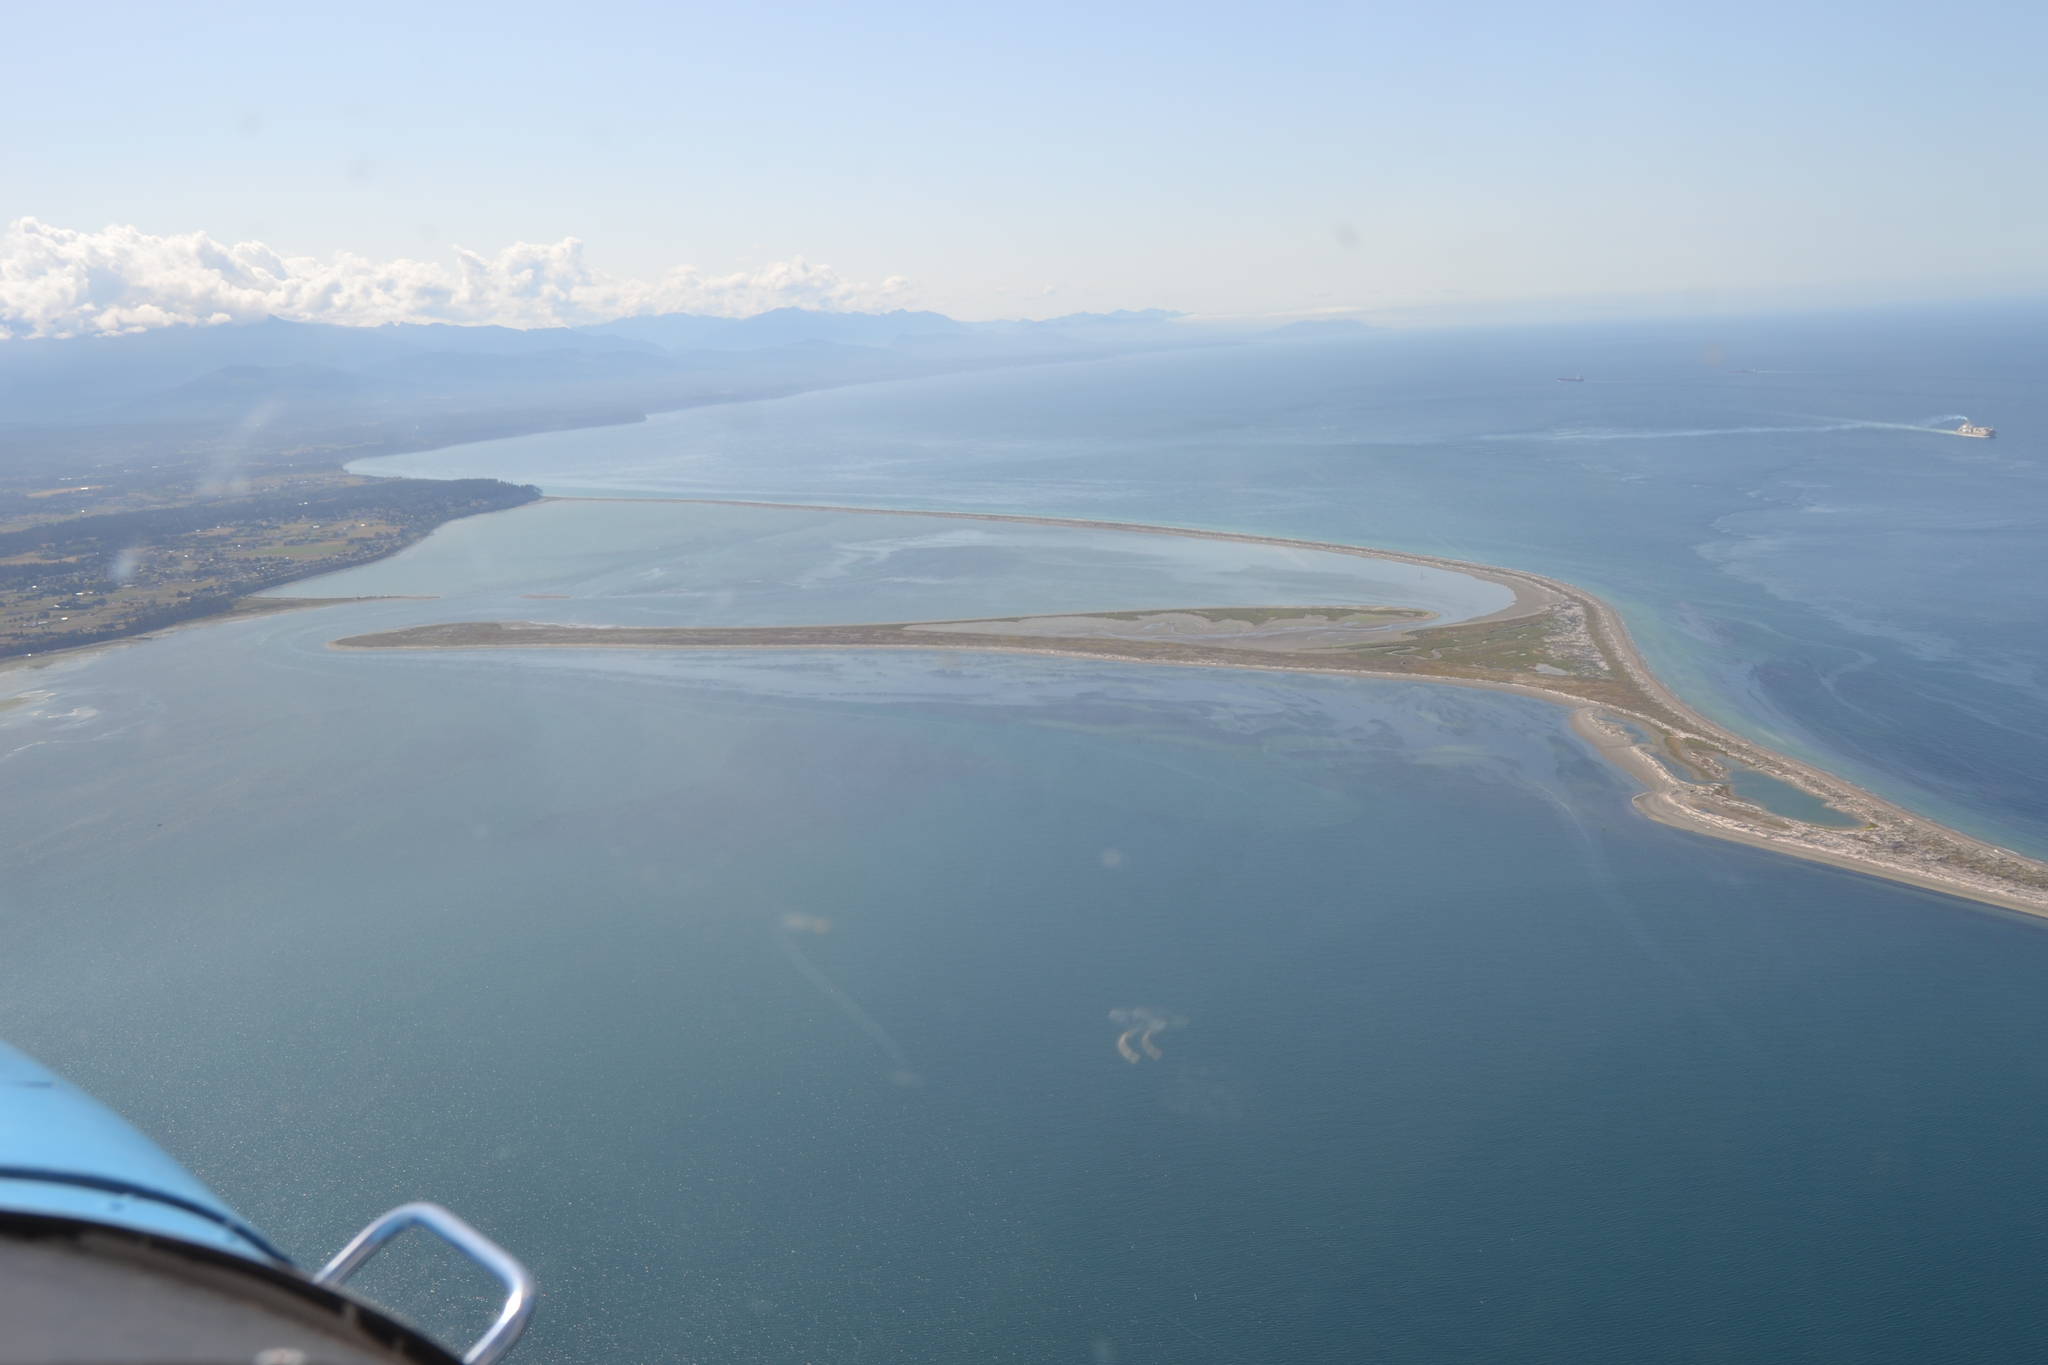 Approval came through last week from Clallam County Hearing Examiner Andrew Reeves for the first phase of Jamestown S’Klallam Tribe’s planned oyster farm south of the Dungeness Spit. Tribal officials must receive more licenses and permits from state and federal agencies before proceeding. Before expanding to phase 2, they also must prove there’s no negative impacts from phase 1. Sequim Gazette photo by Matthew Nash